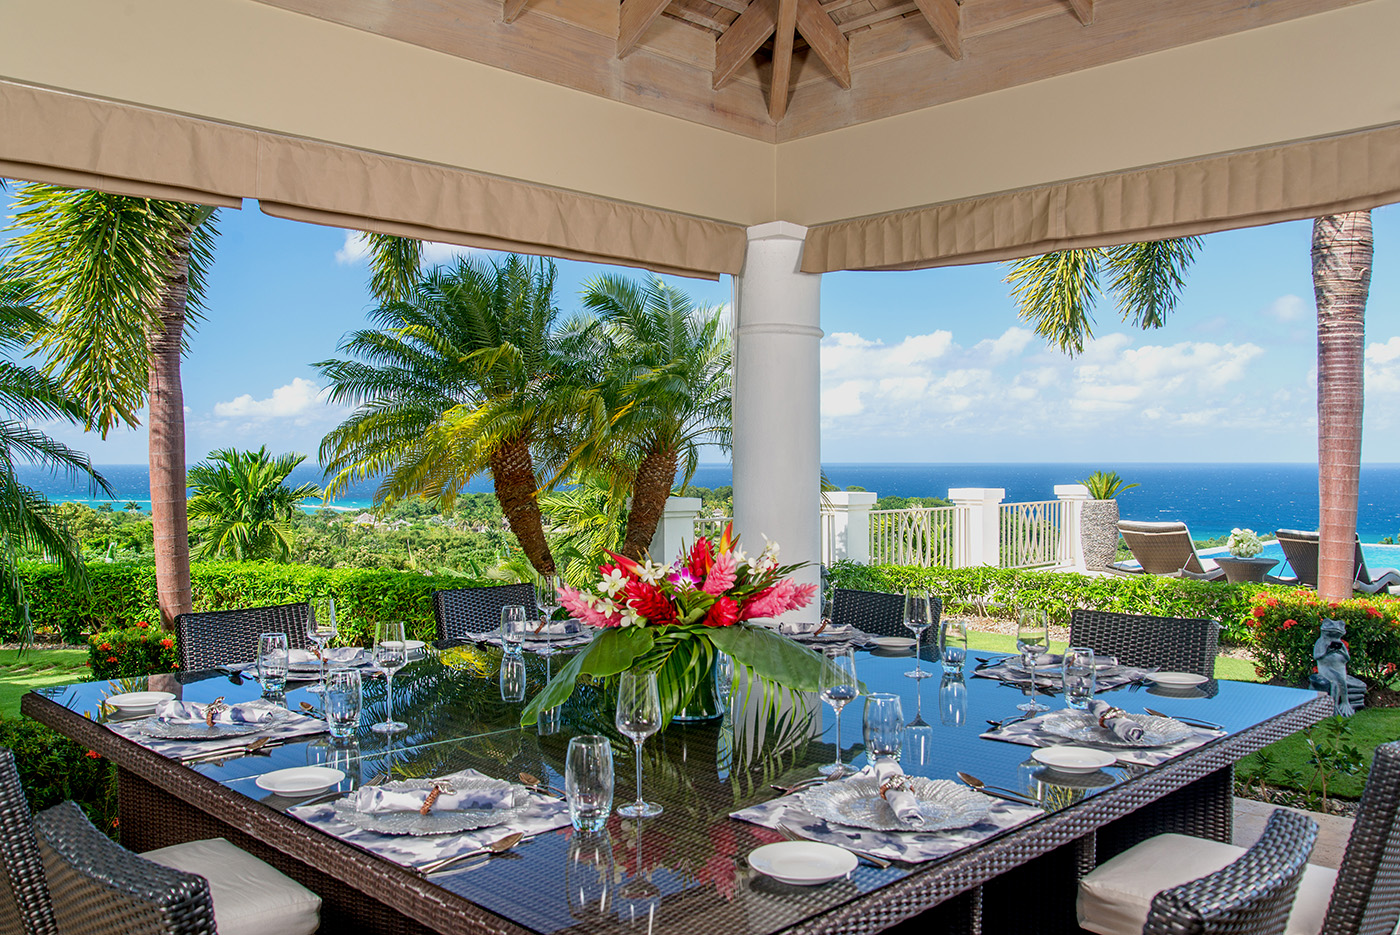 Outdoor dining with sea views at Harmony Hill in Jamaica